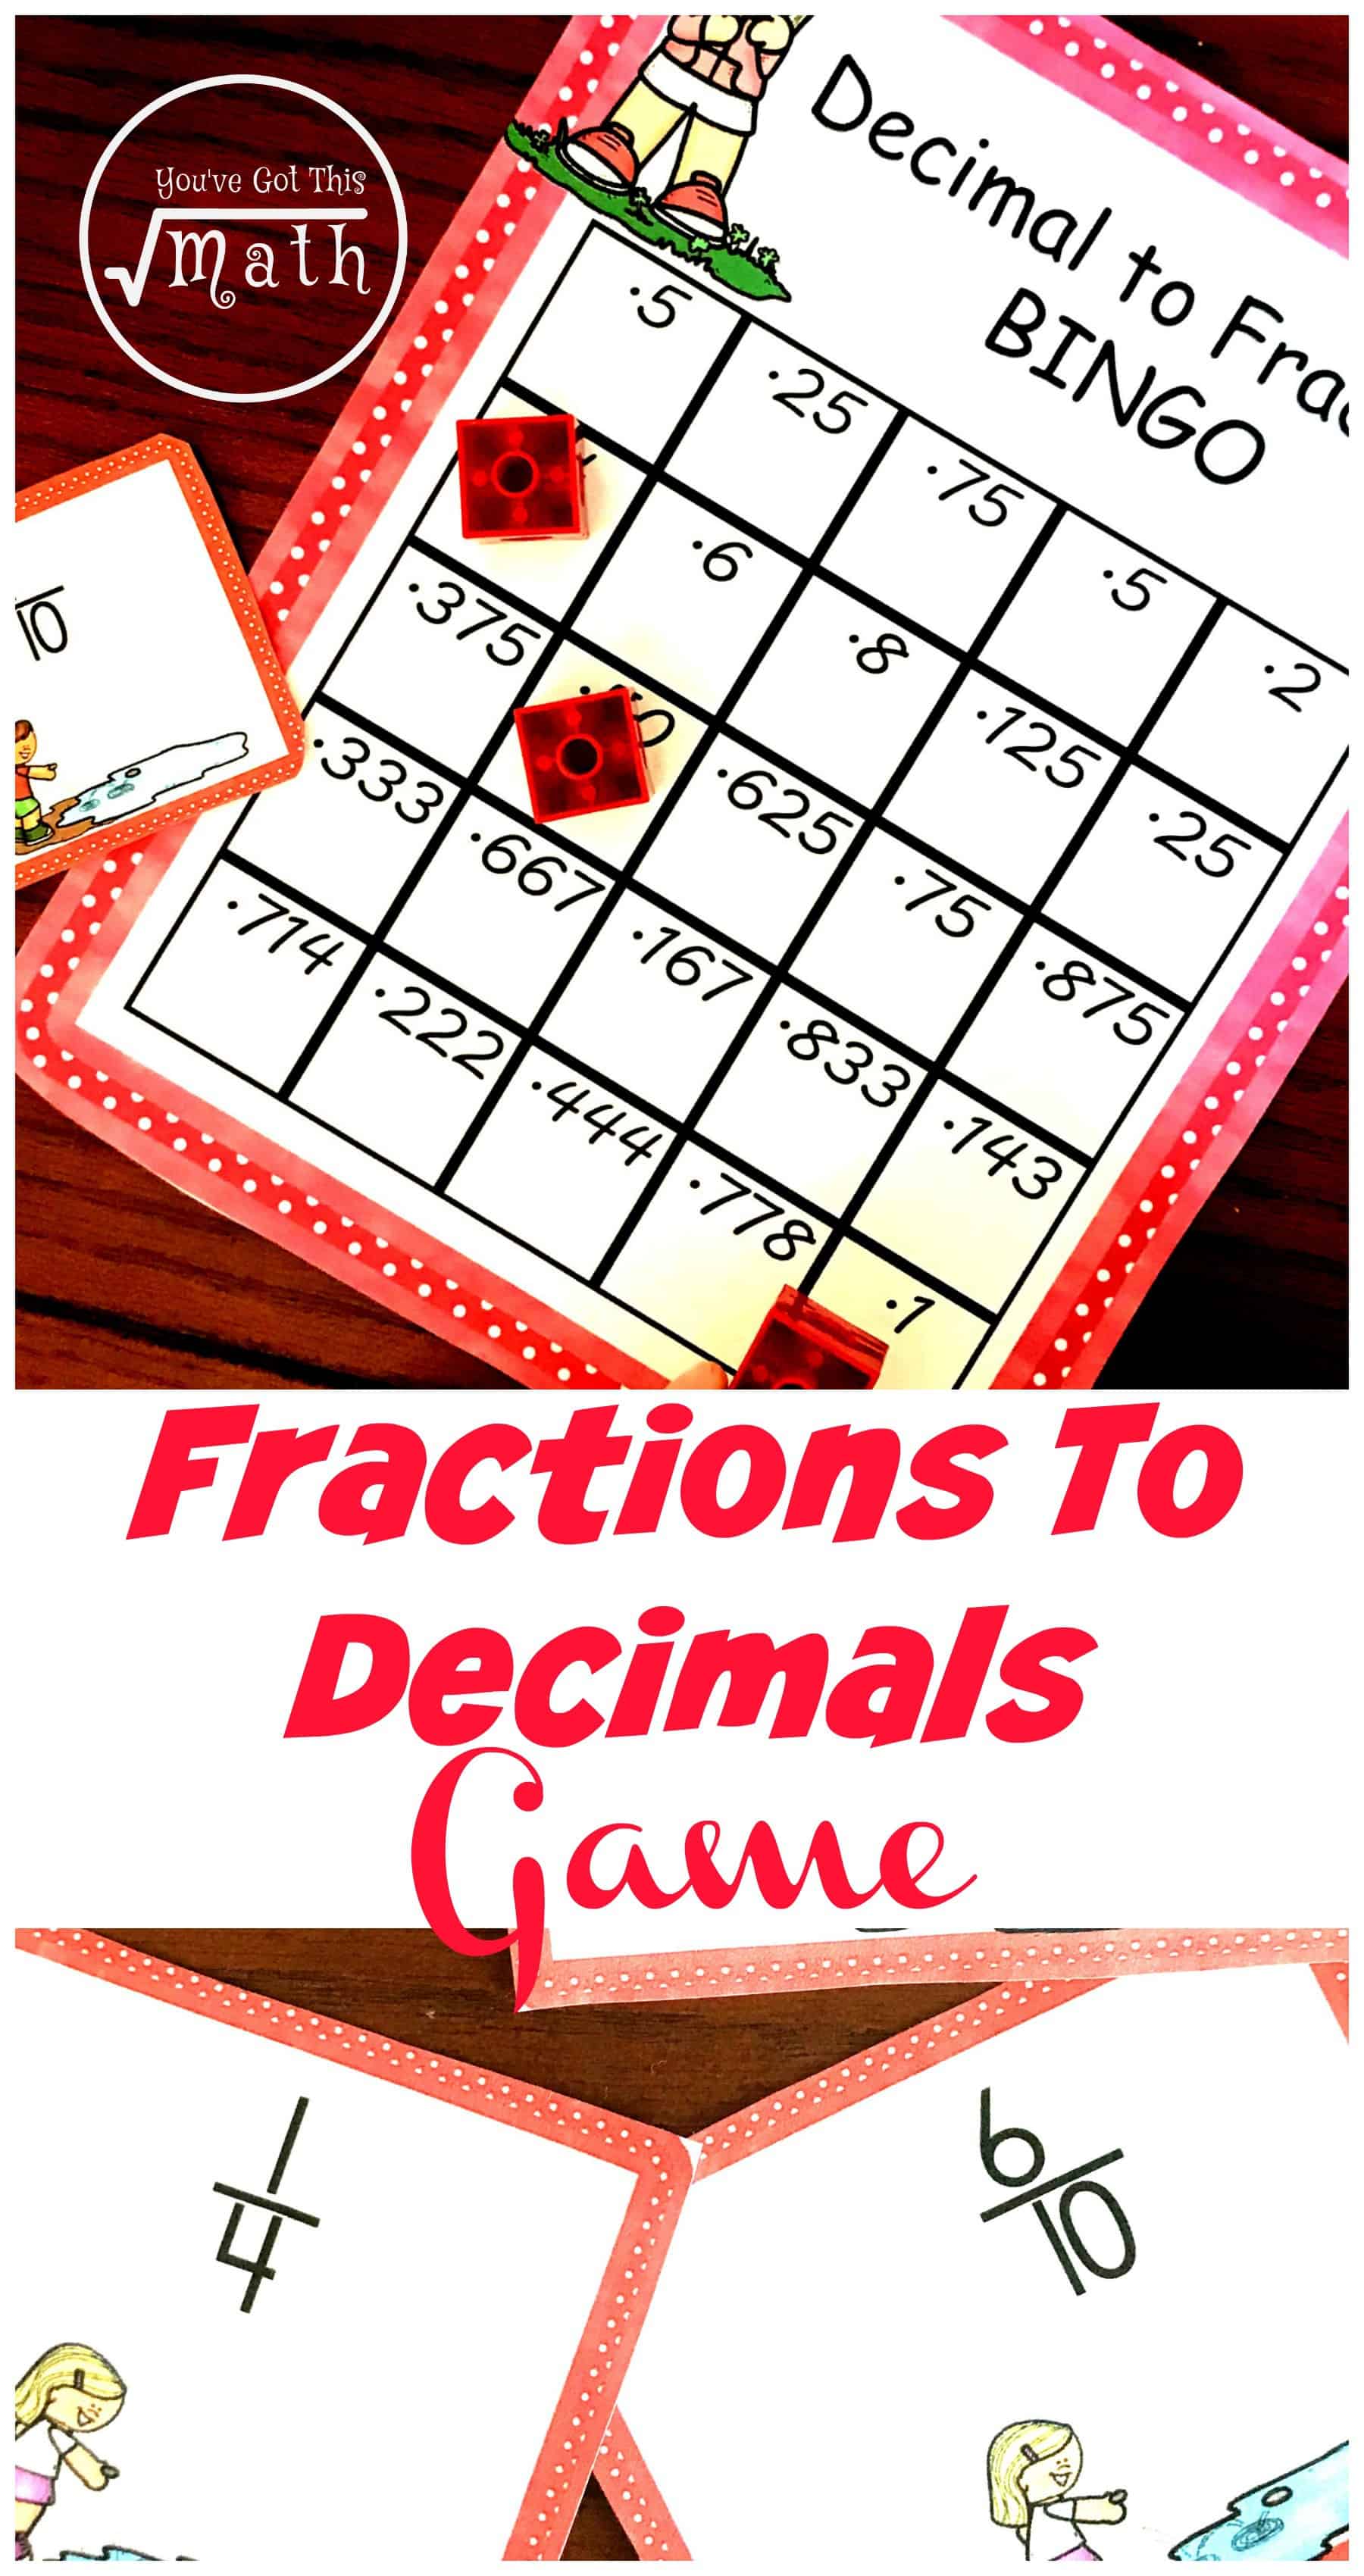 This free fraction to decimal game is a perfect way for children to practice converting fractions like 1/2, 3/4, 4/5, and 5/7 to decimals.